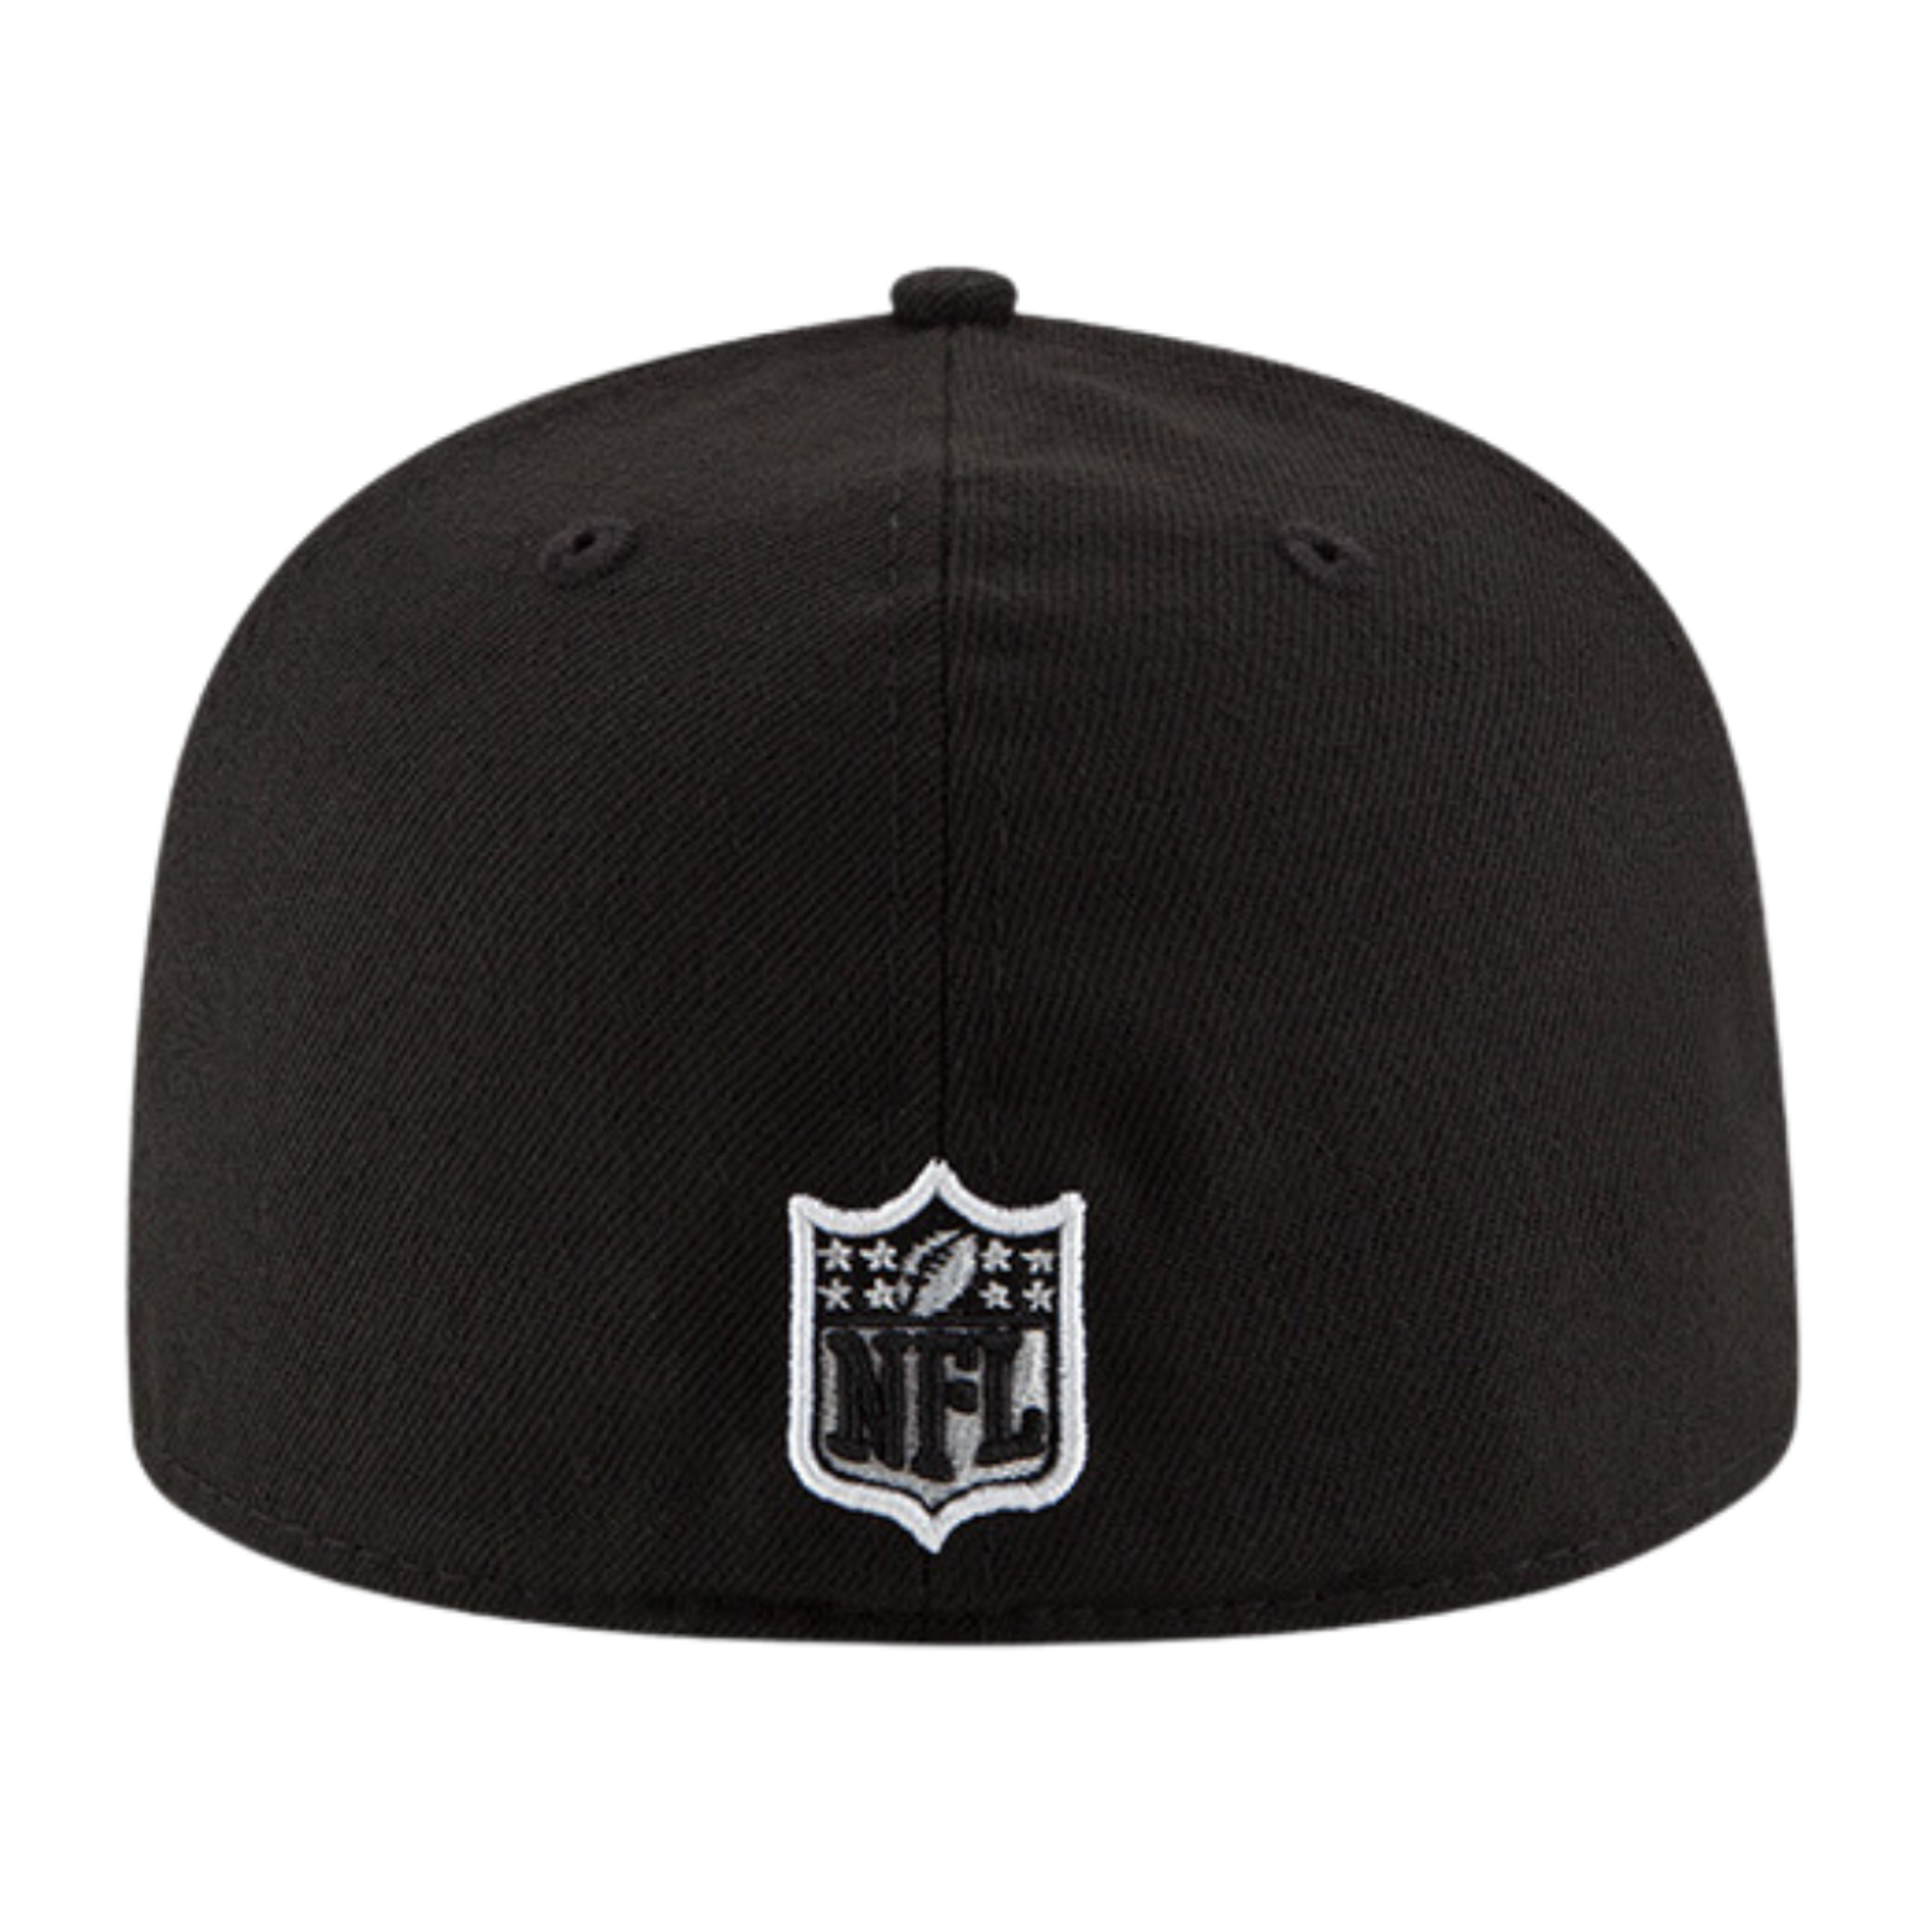 Alternate View 2 of Green Bay Packers Black on Dub New Era Black/White 59FIFTY Fitte